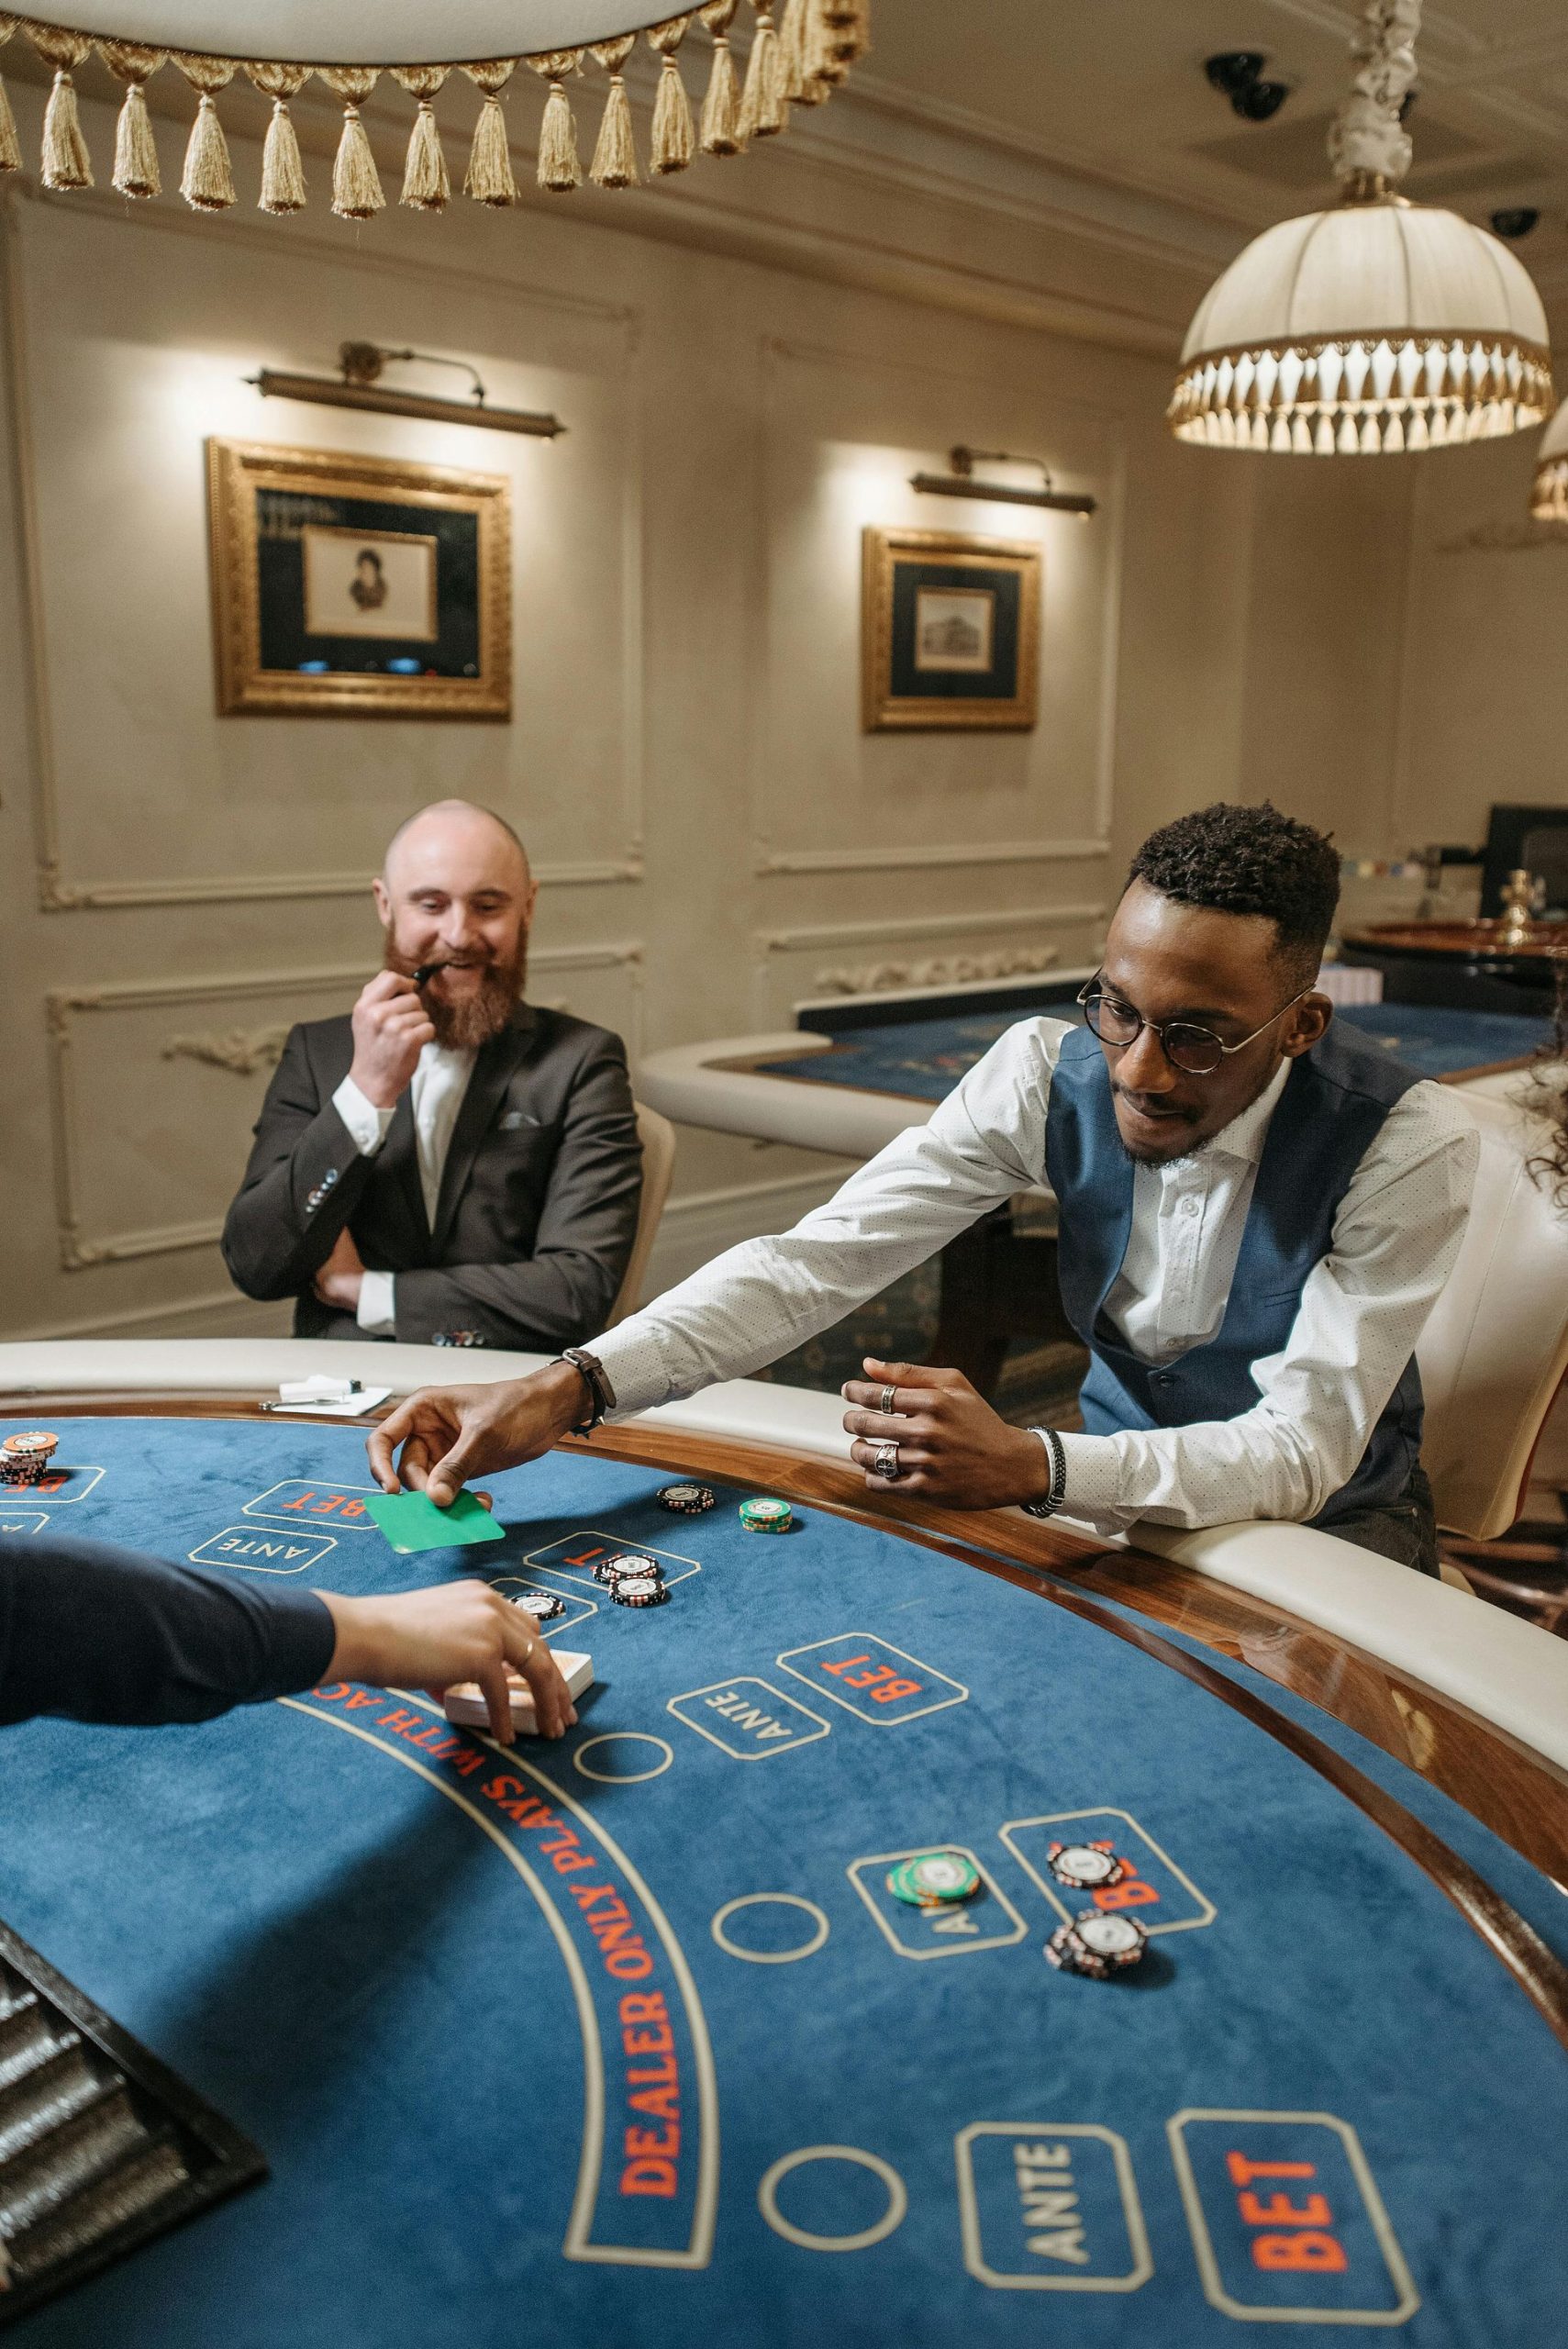 How user experience is under pressure in the Dutch casino industry